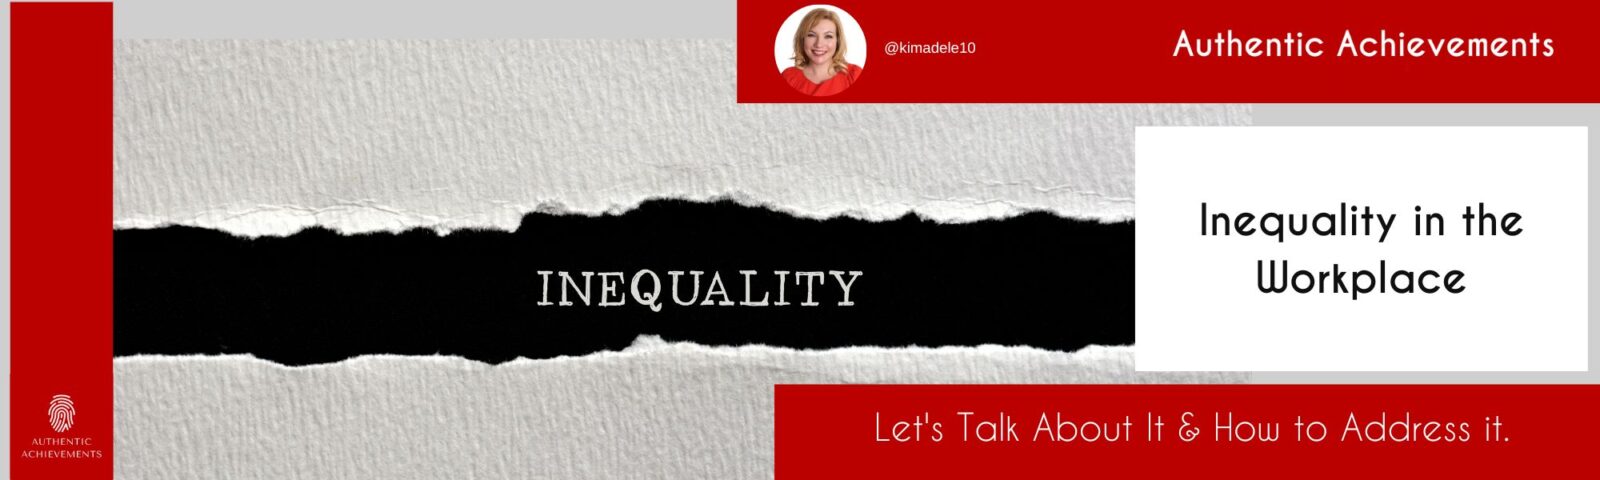 Inequality in the Workplace: Let’s Talk About It & How to Address it.